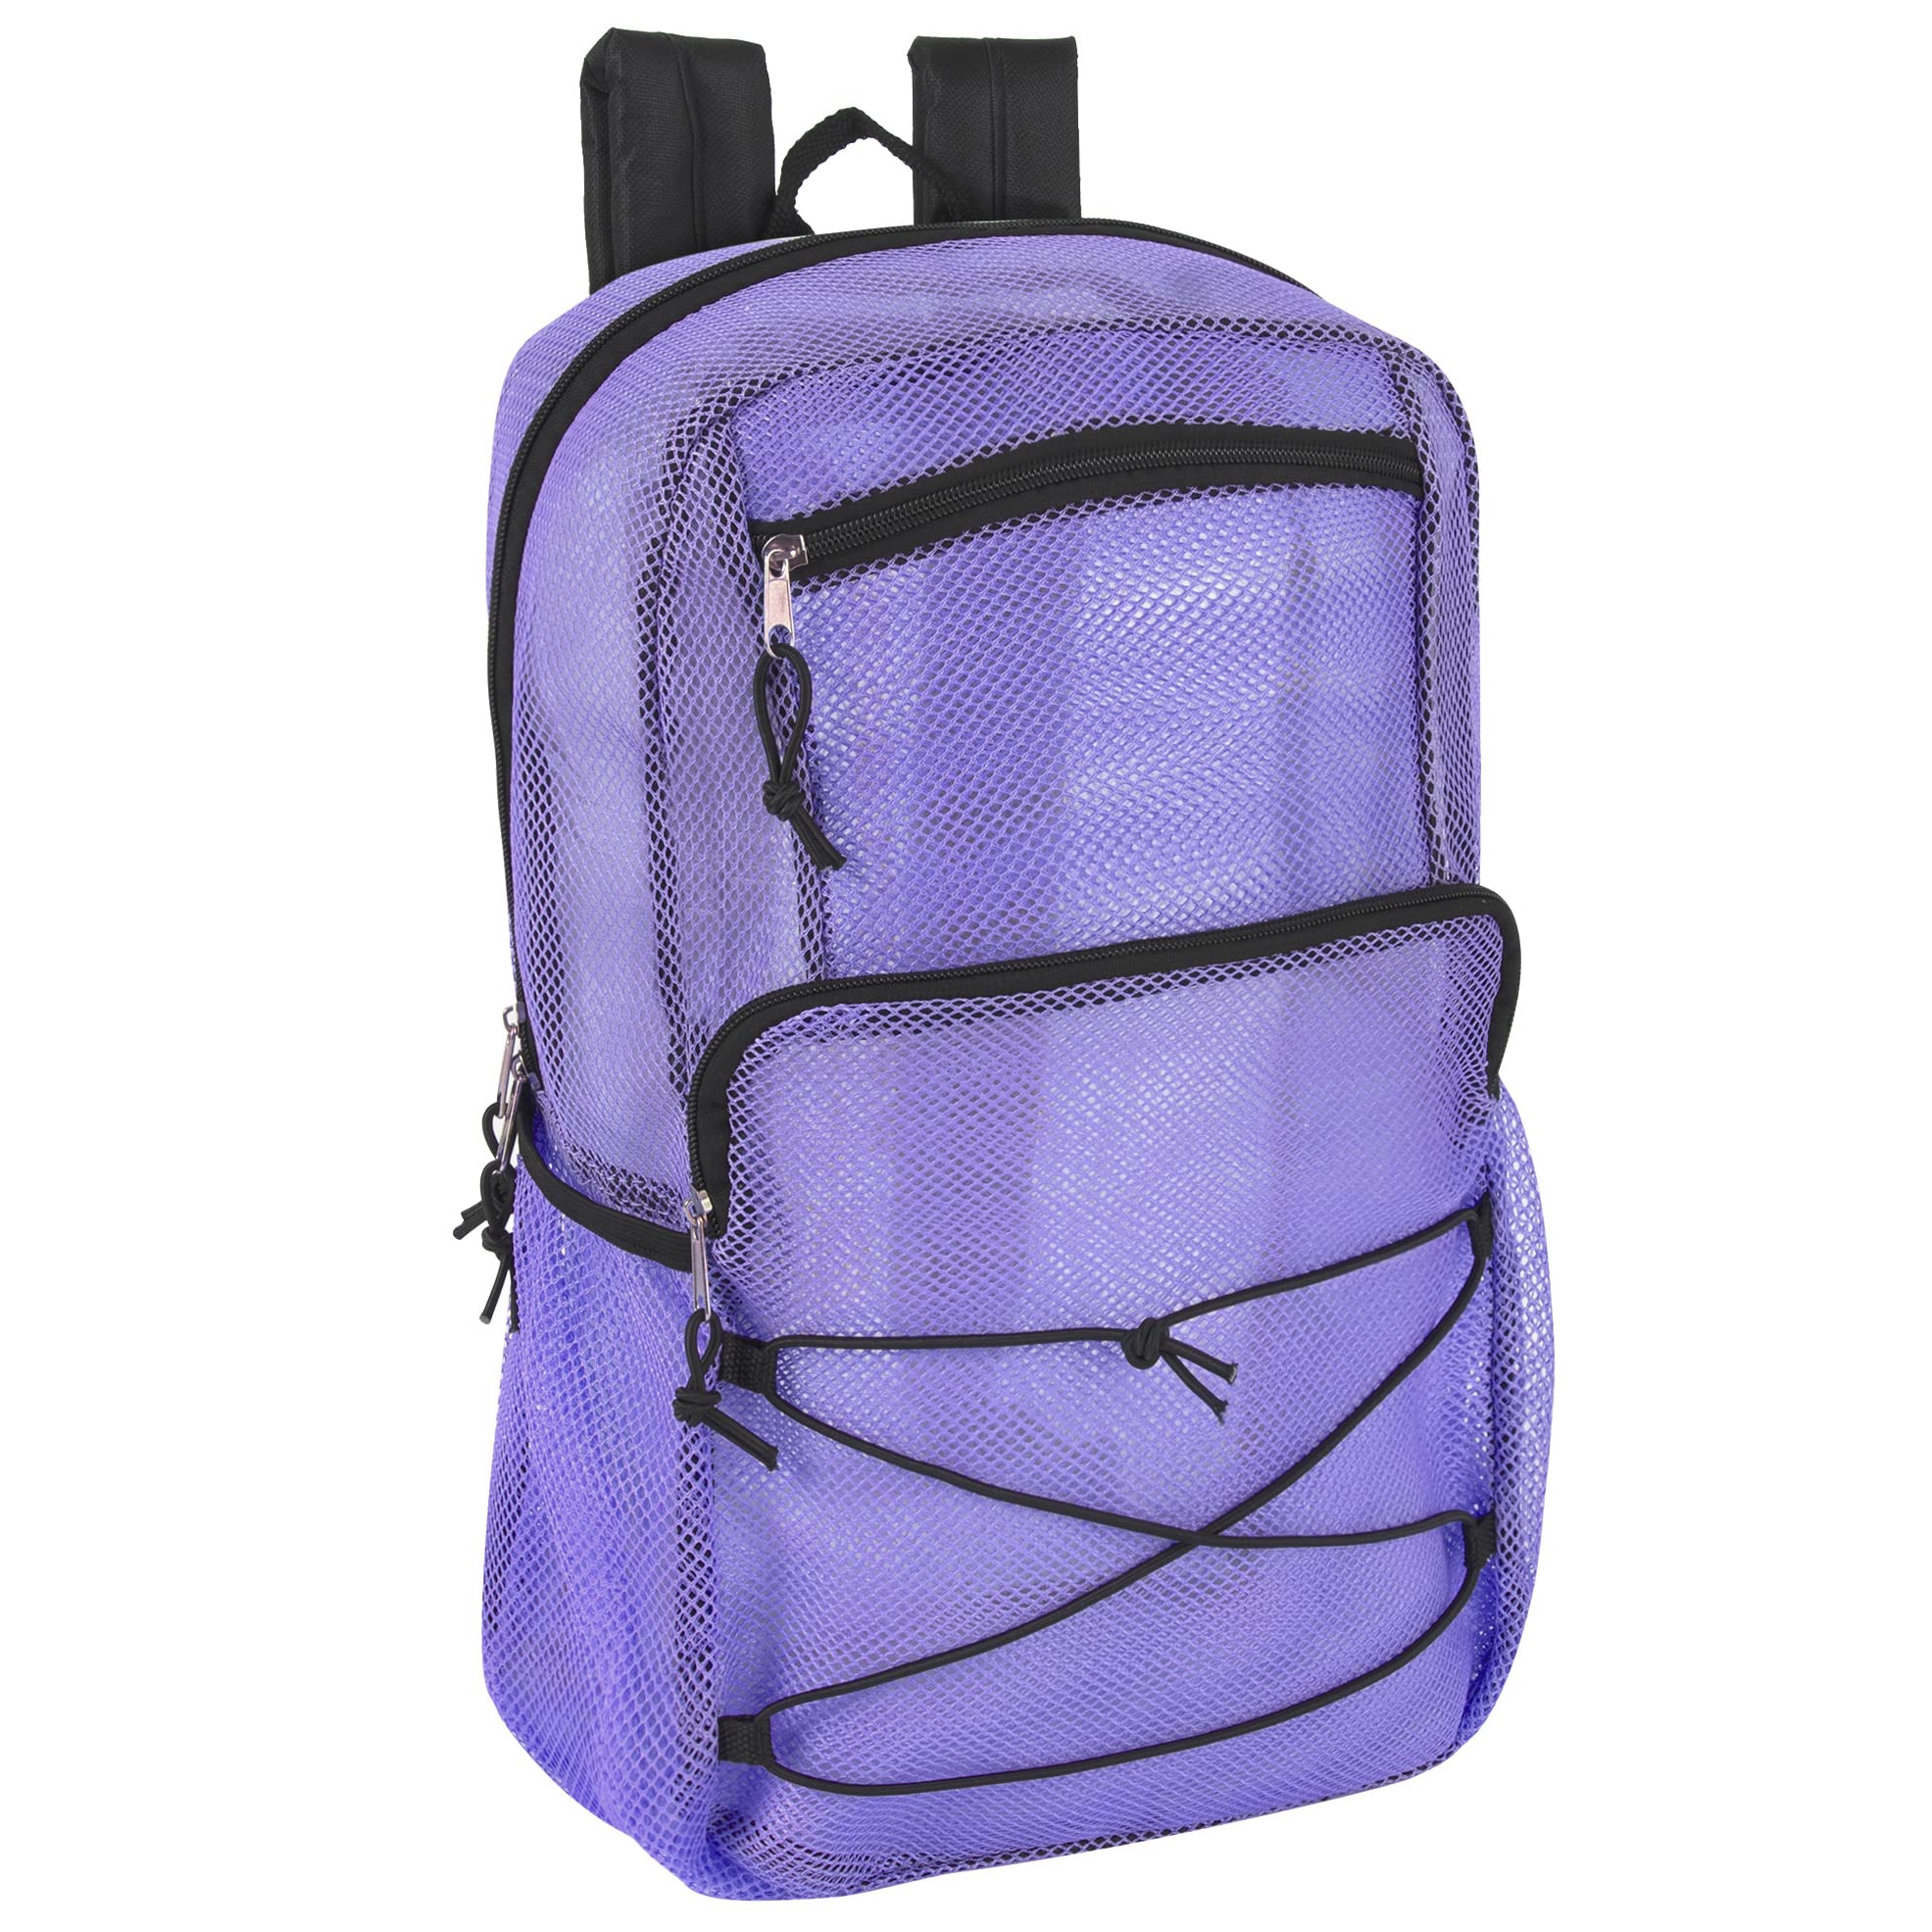 Trailmaker Deluxe See Through Mesh Backpack with Bungee Cord & Adjustable Padded Straps for Swimming, Travel (Lavender)